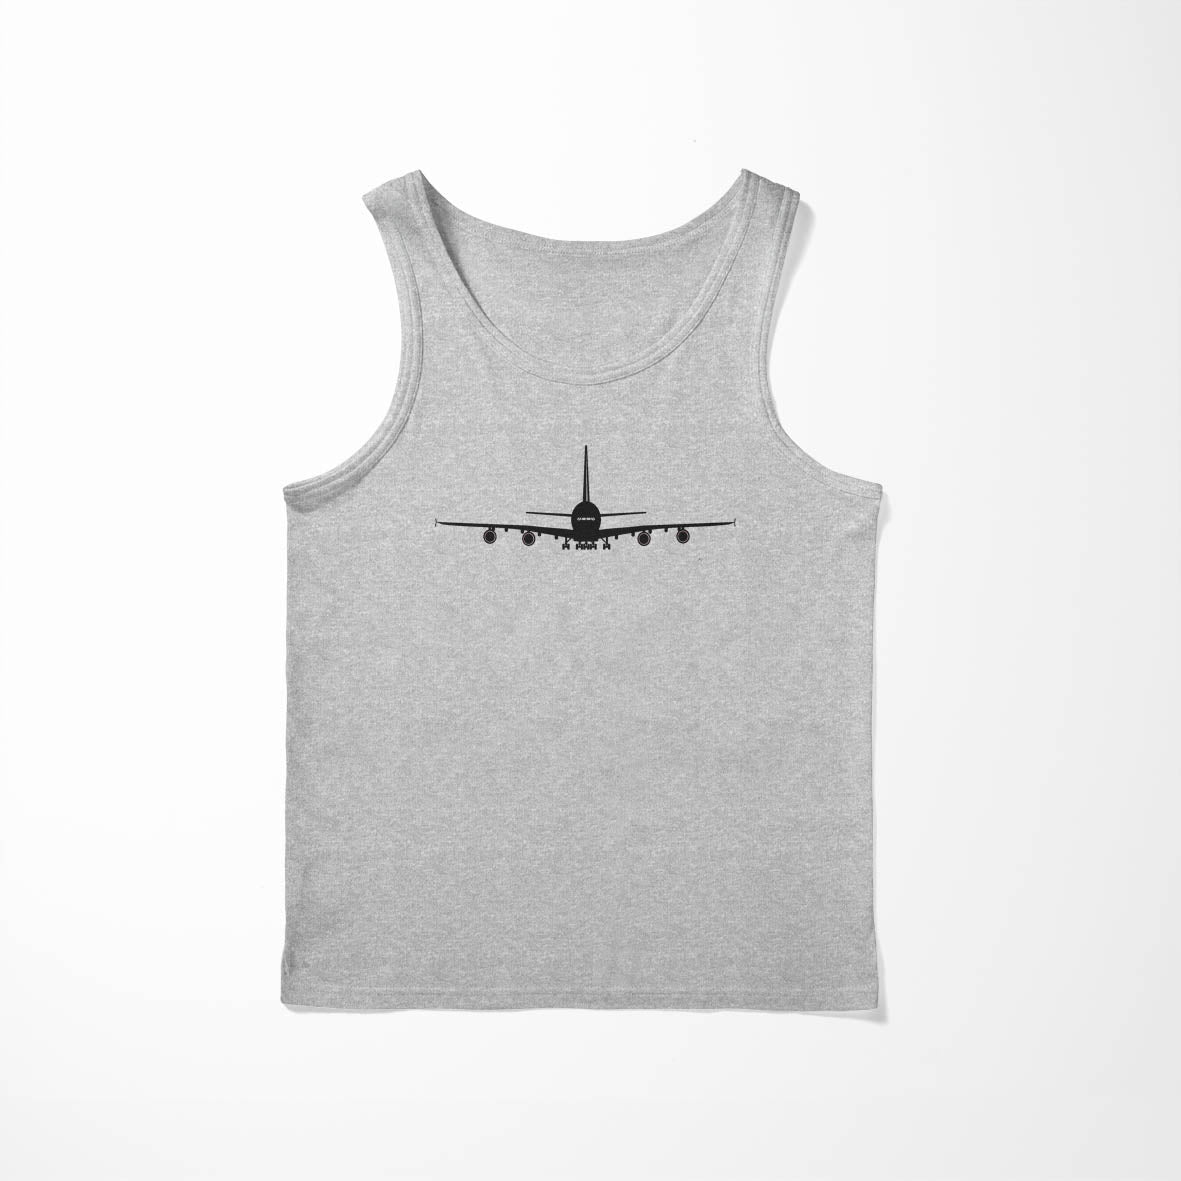 Airbus A380 Silhouette Designed Tank Tops